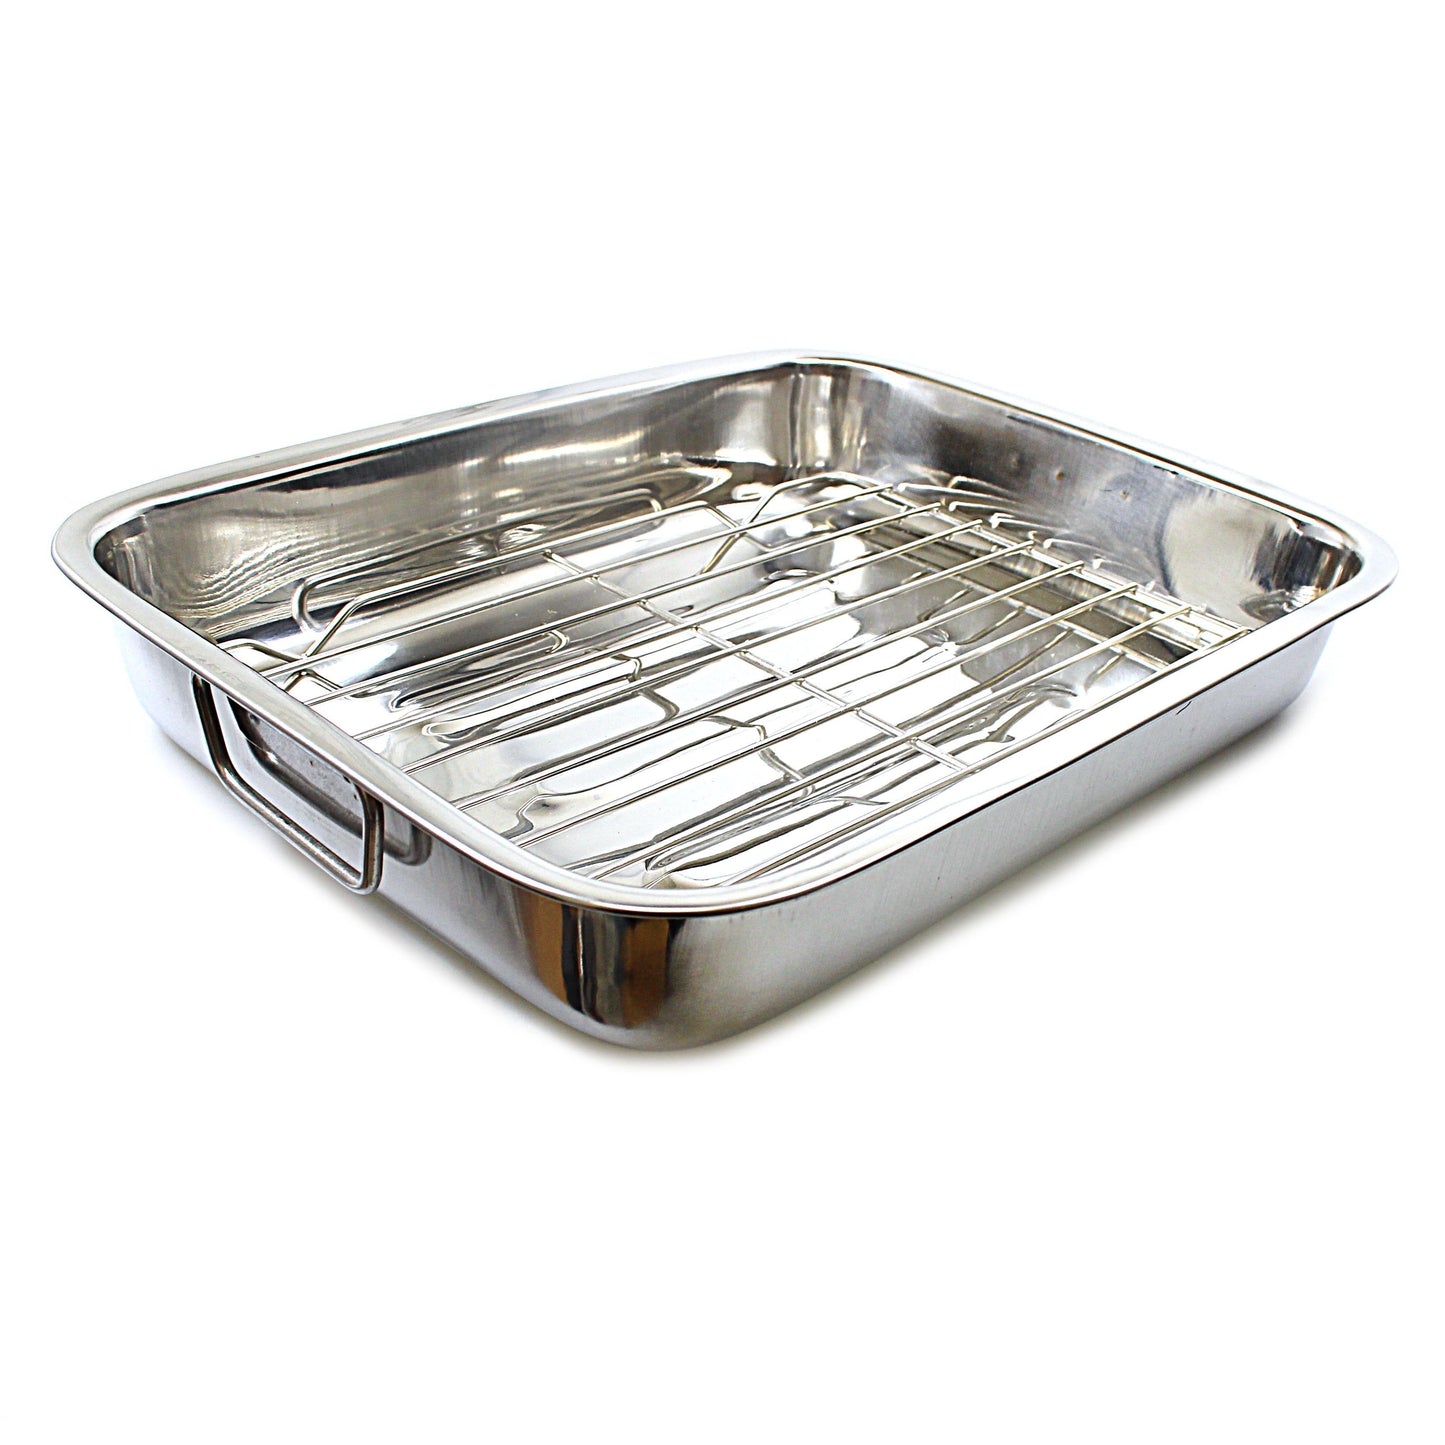 Stainless Steel Roasting Lasagne Tray with Handless and Rack 30cm ST3237 (Parcel Rate)